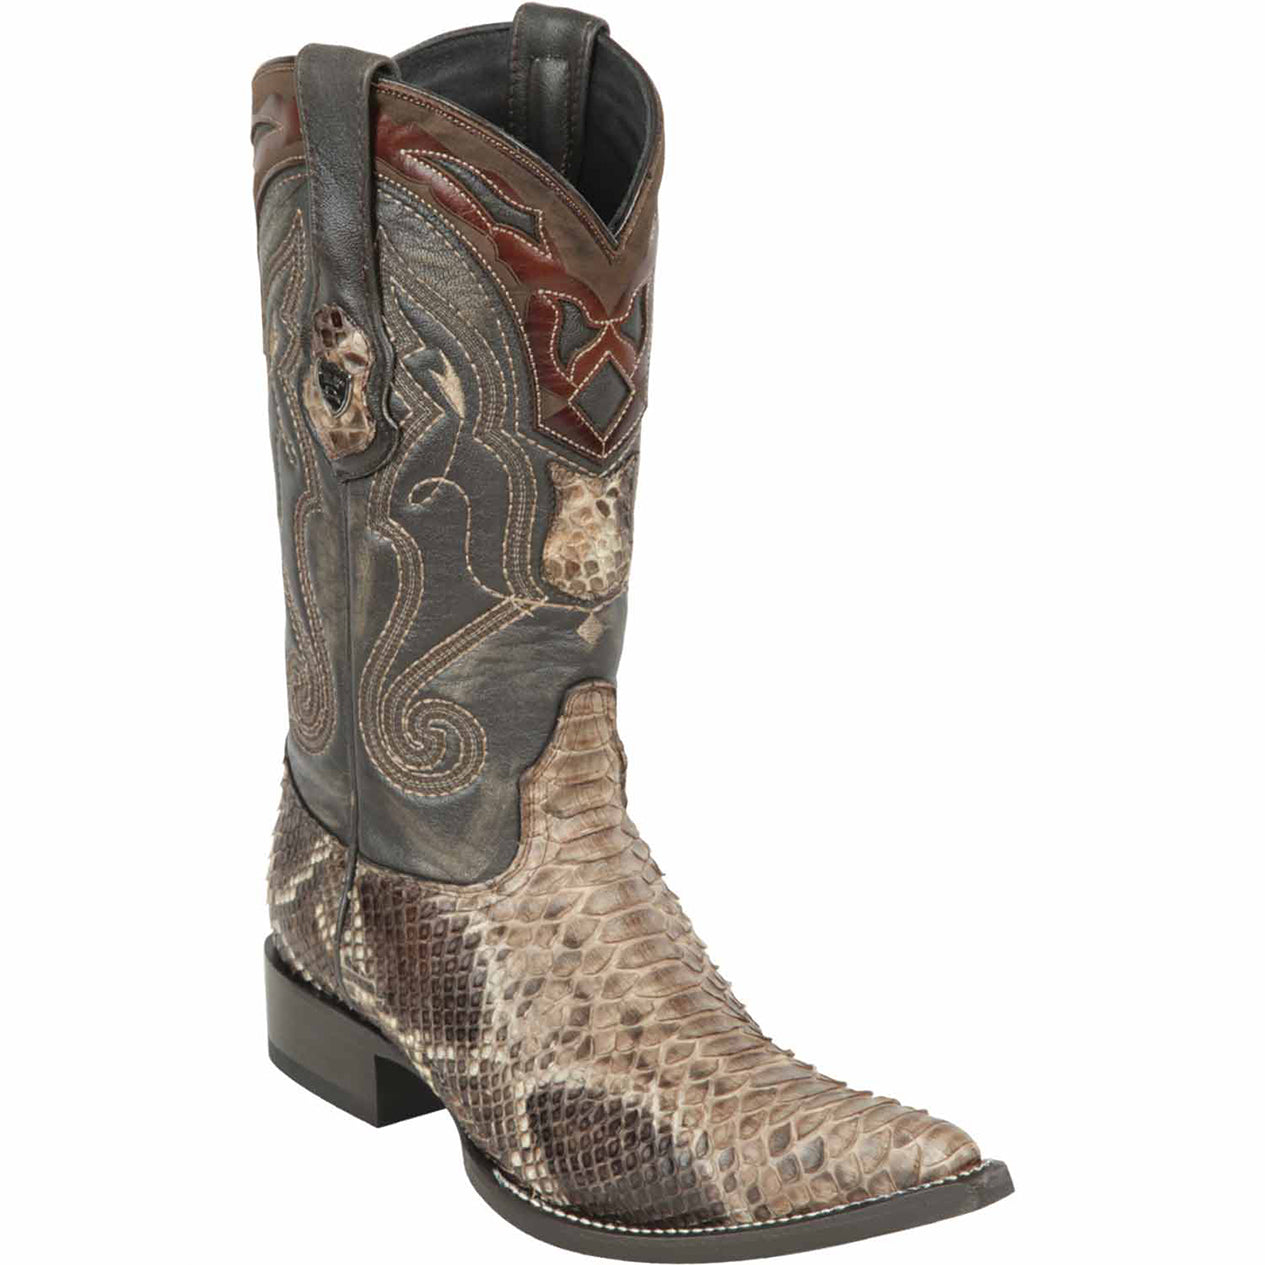 Rustic Brown Natural Python Snakeskin Cowboy Boots - Pointy Toe